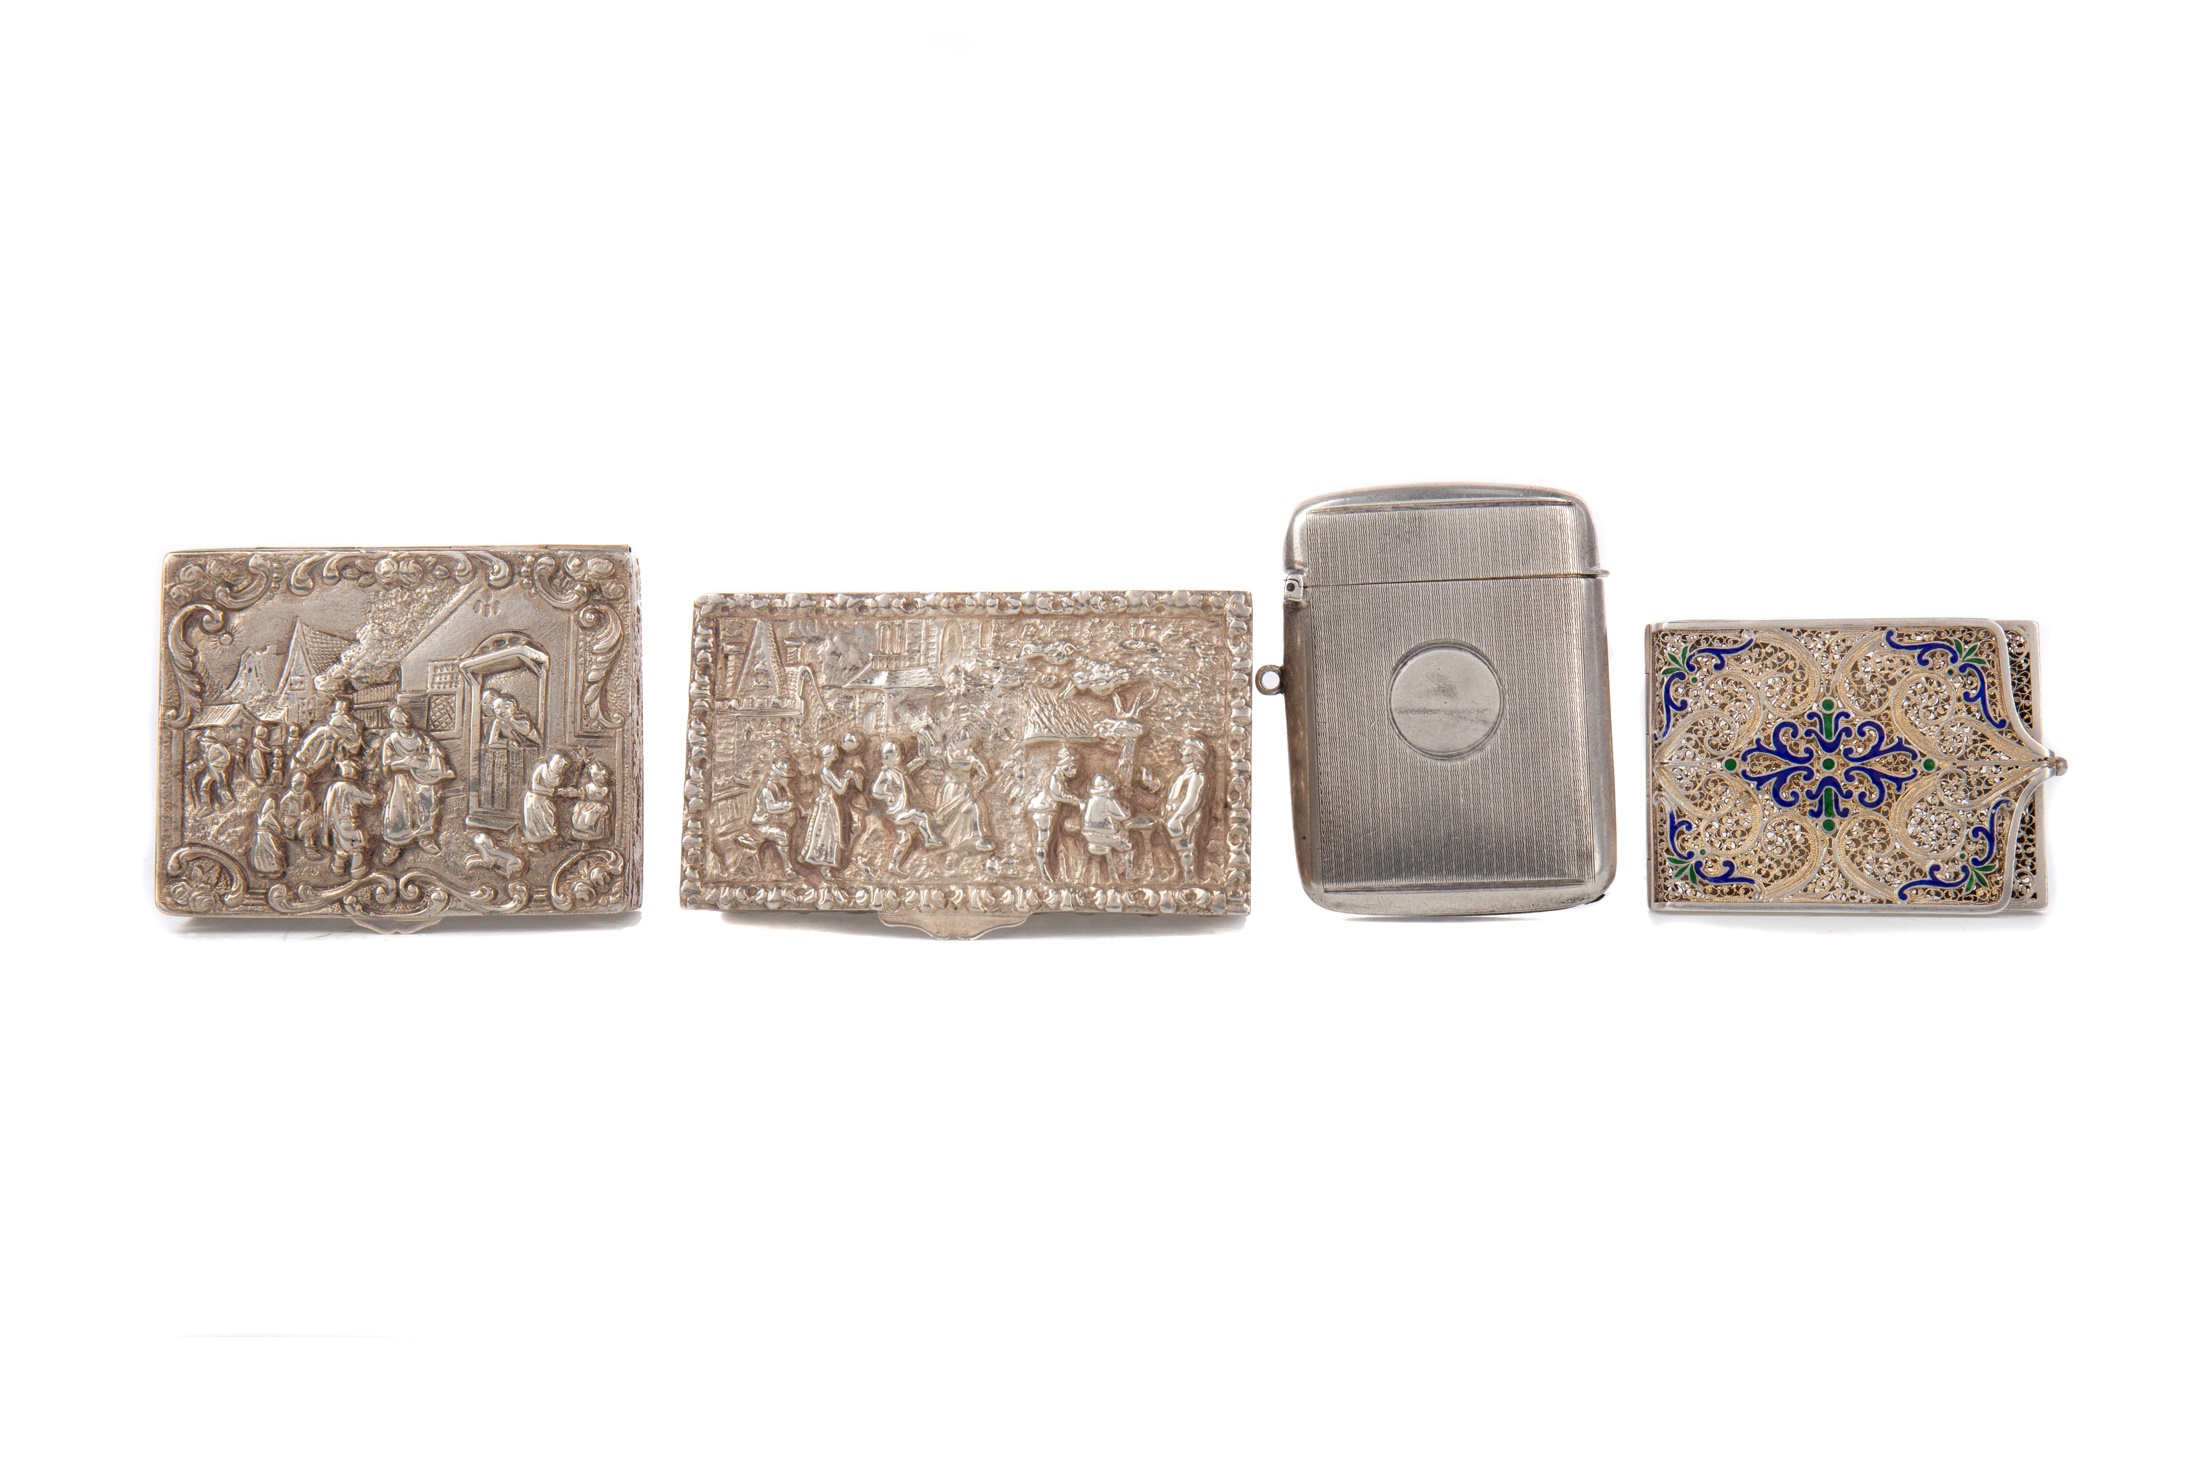 TWO CONTINENTAL SILVER BOXES, ALONG WITH A VESTA AND A FILIGREE CASE